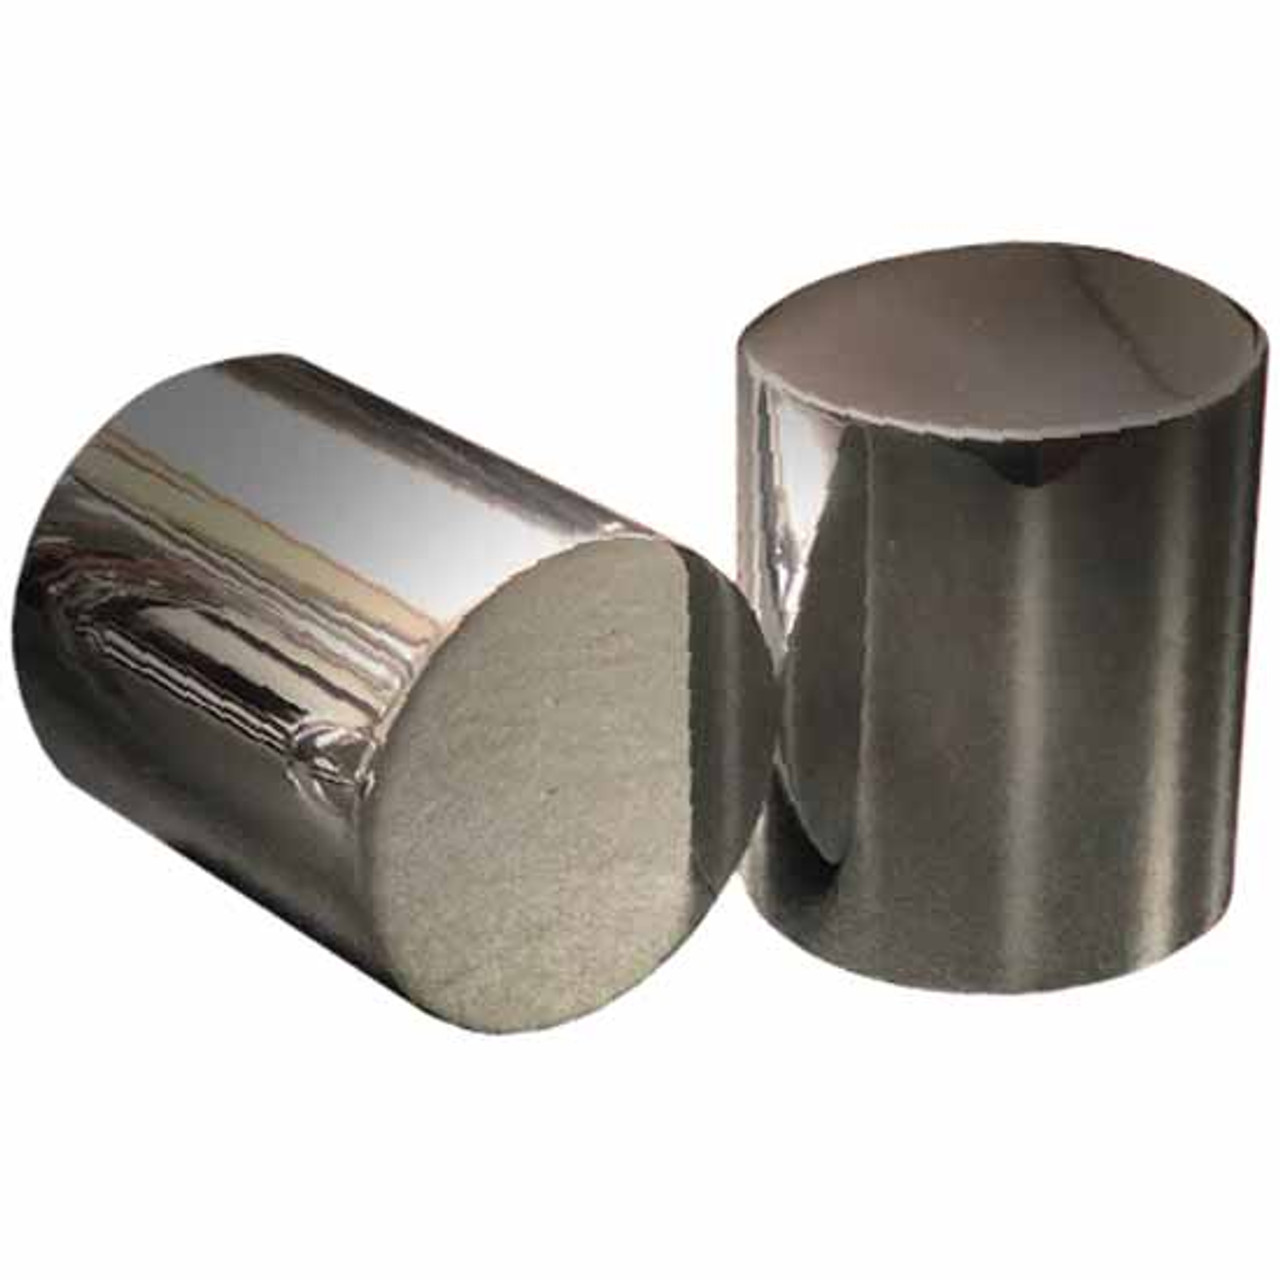 1.5 X 4.25 Inch Chrome Plastic Spike Lug Nut Cover, Push On For